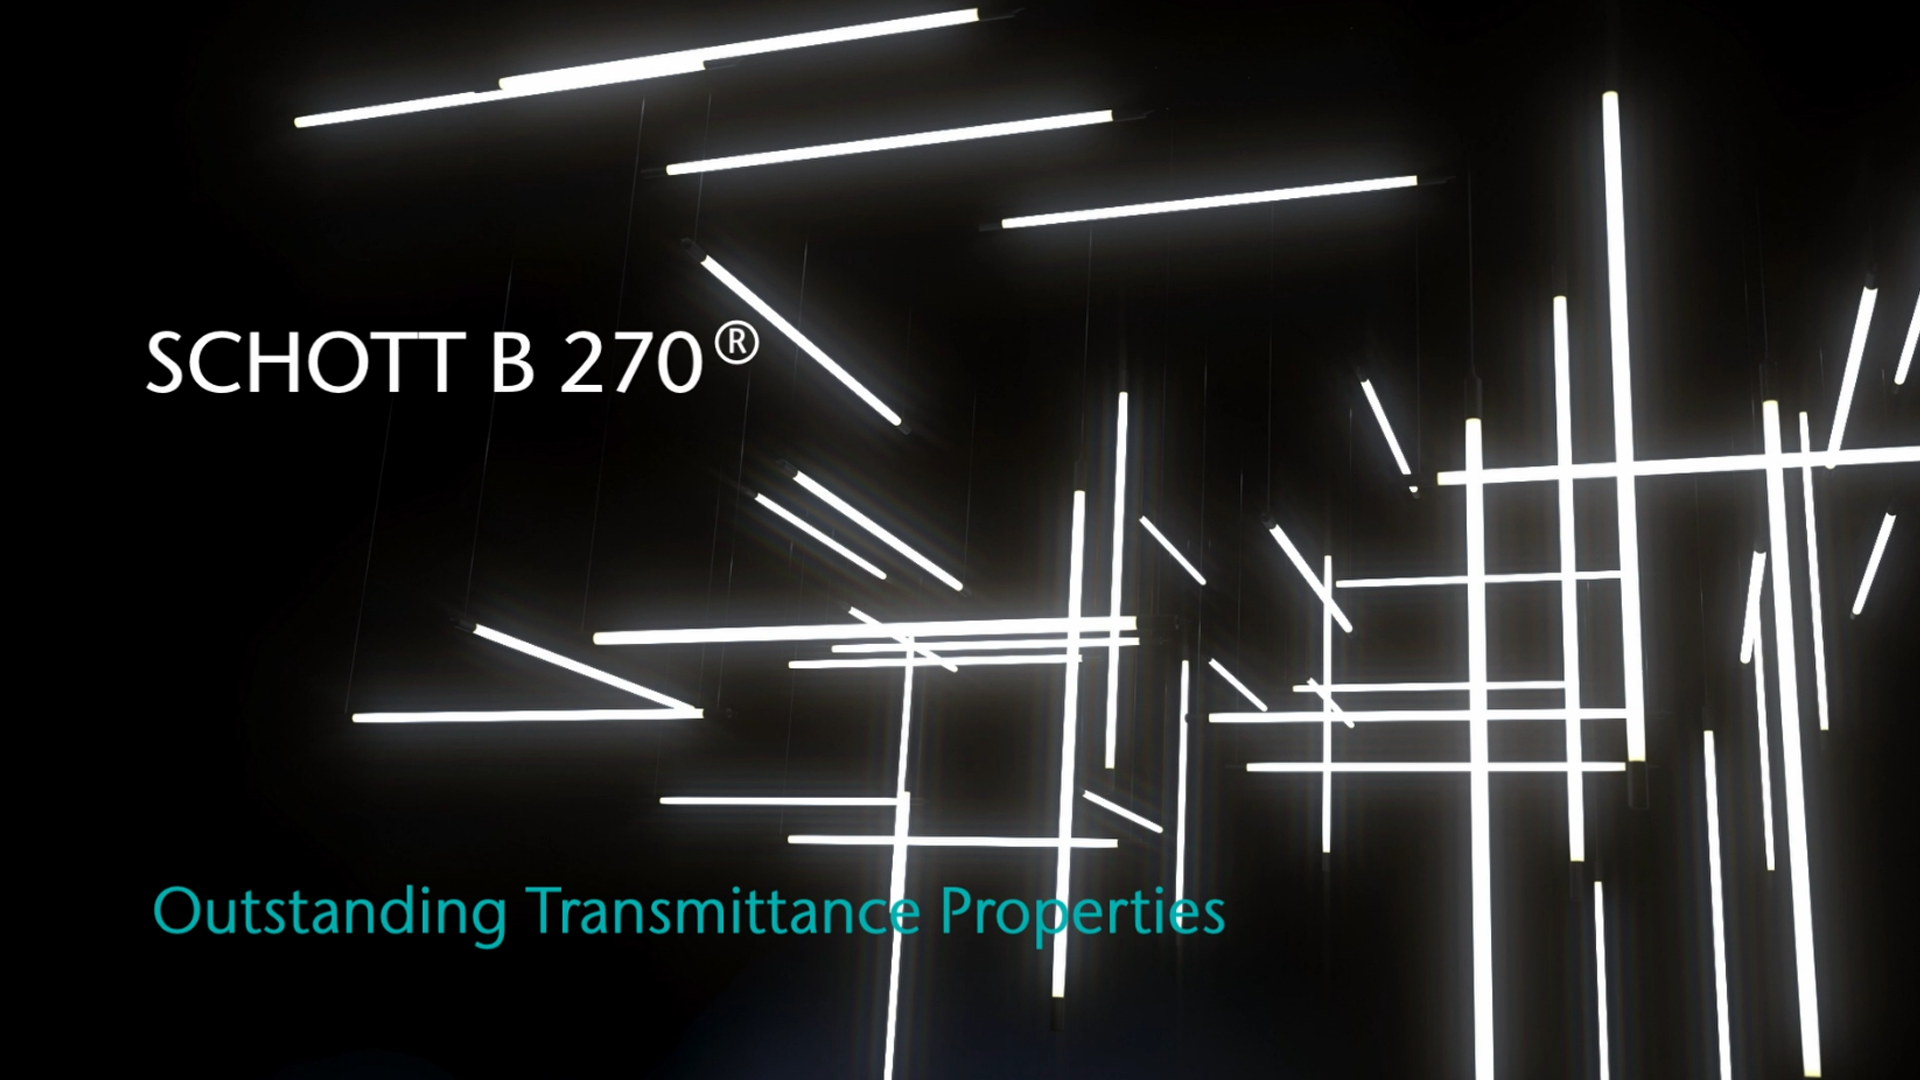 A lot of white fluorescent tubes floating on different levels at right angles to each other in a dark room. In front of it is a hovering text: “SCHOTT B 270® - Outstanding Transmittance Properties